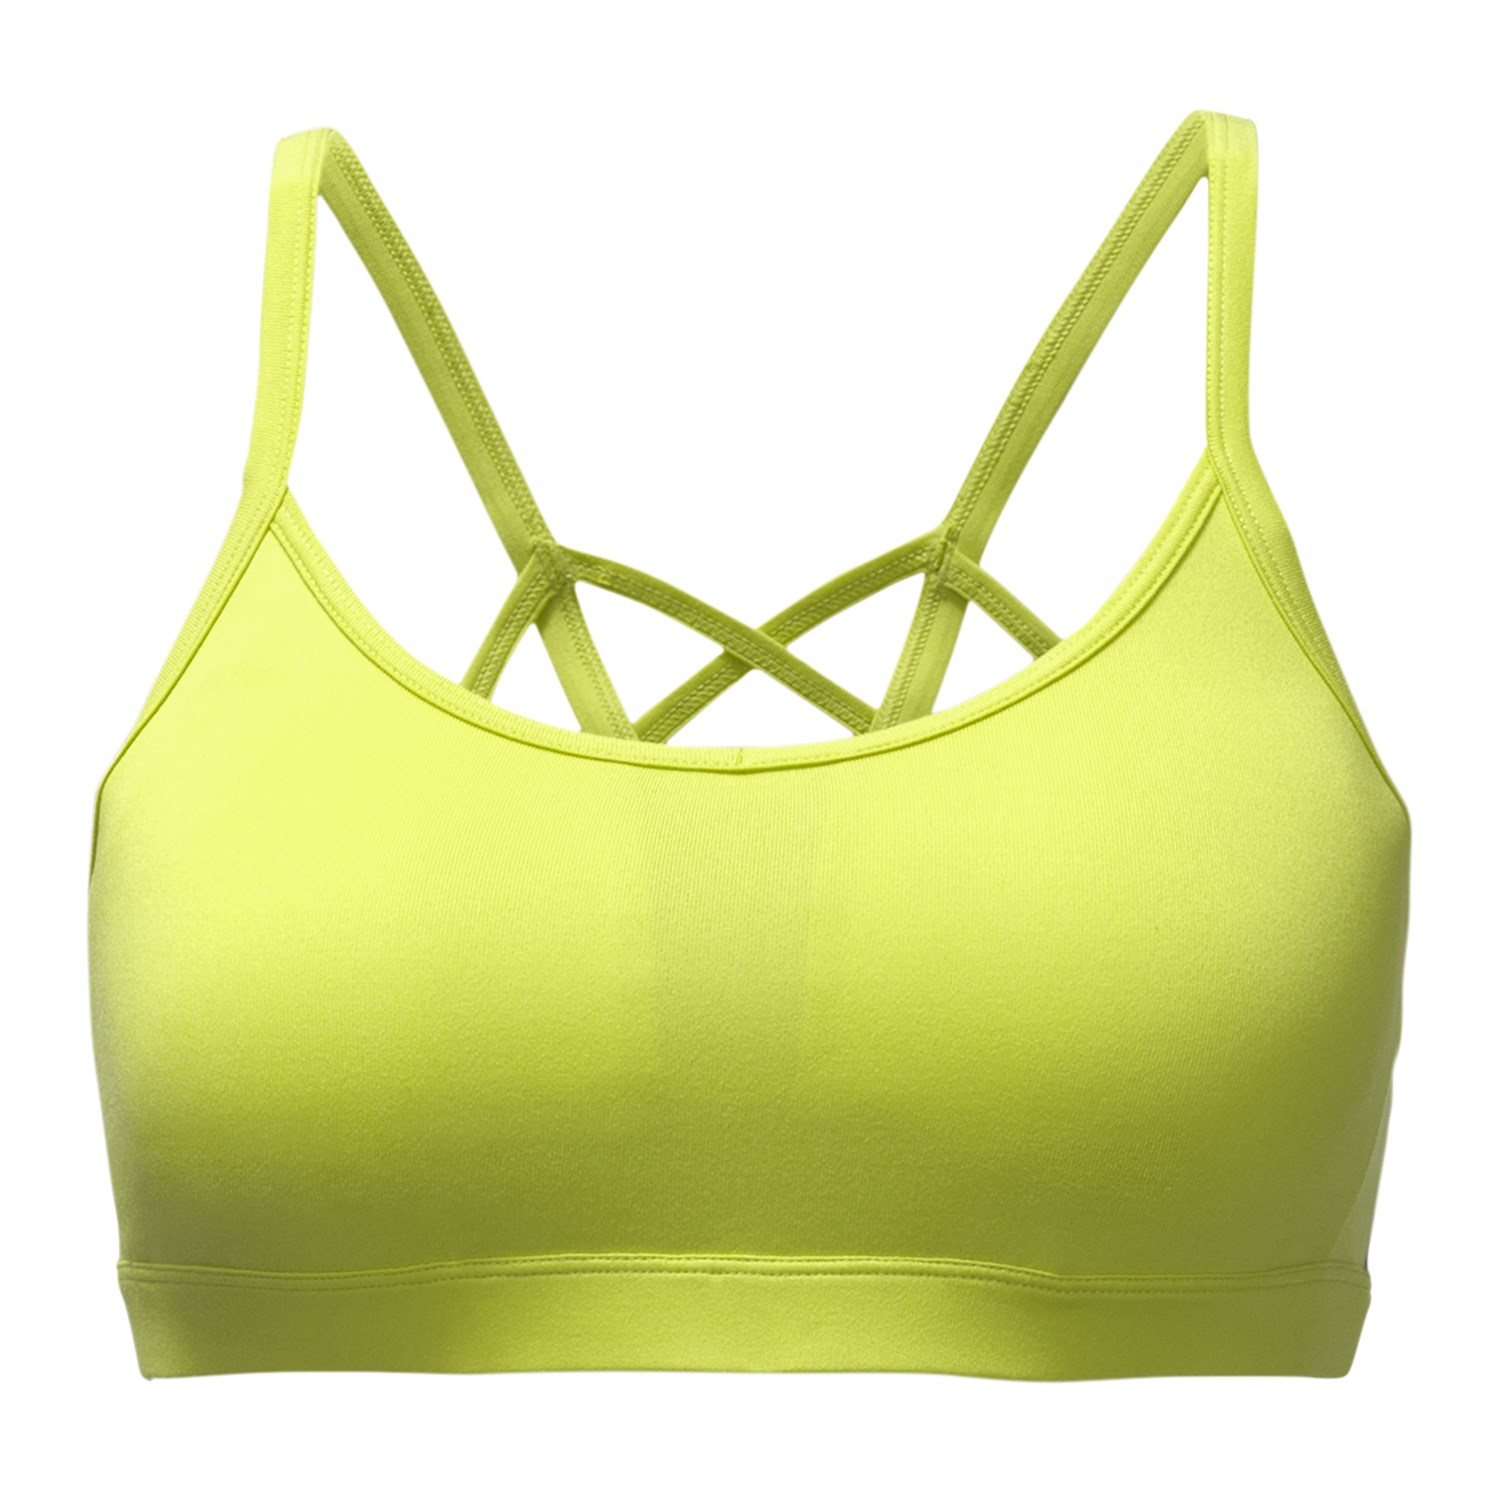 Women's Printed Motivation Sports Bra, The North Face